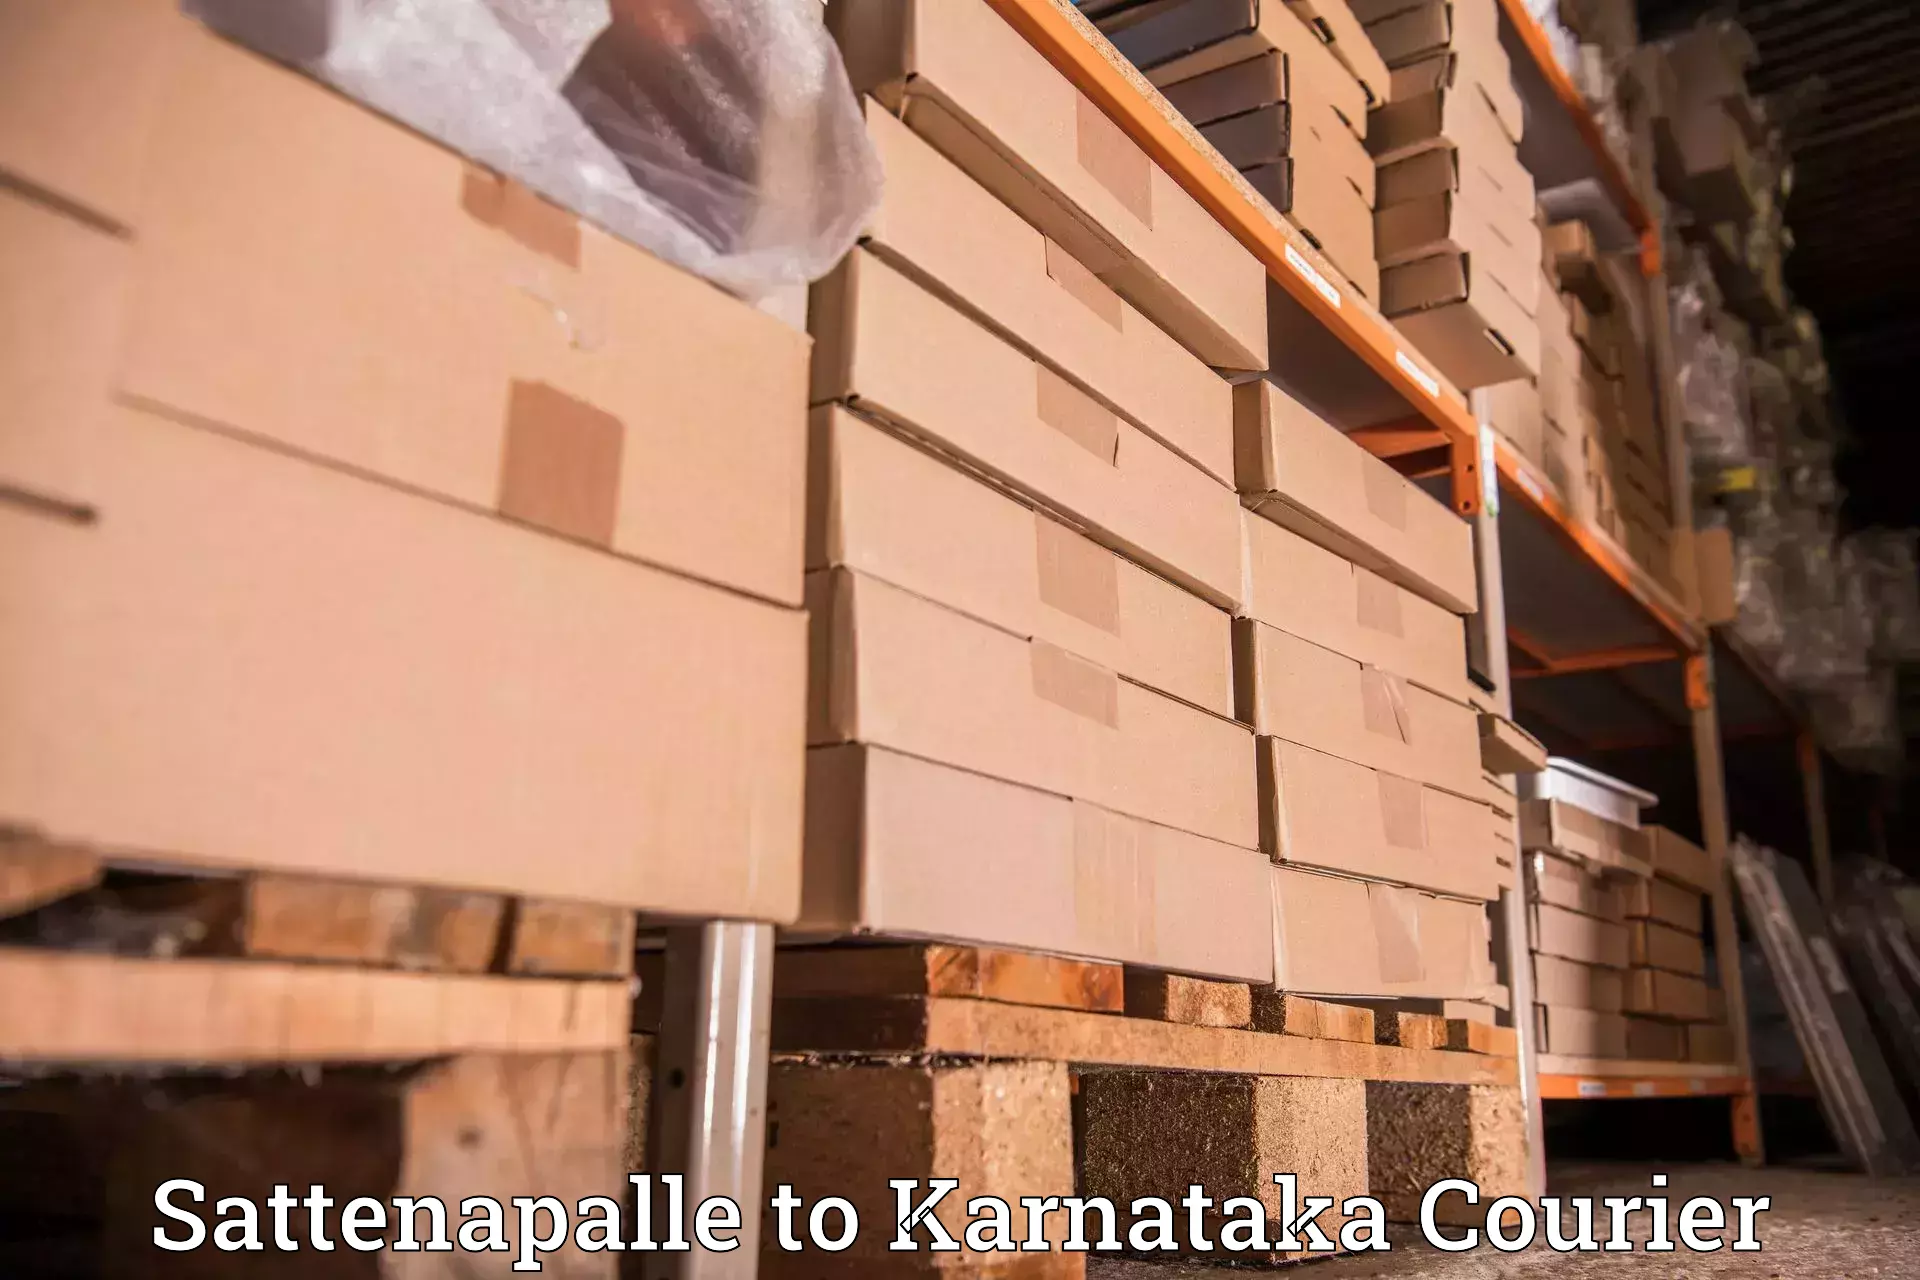 Package delivery network Sattenapalle to Yadgir